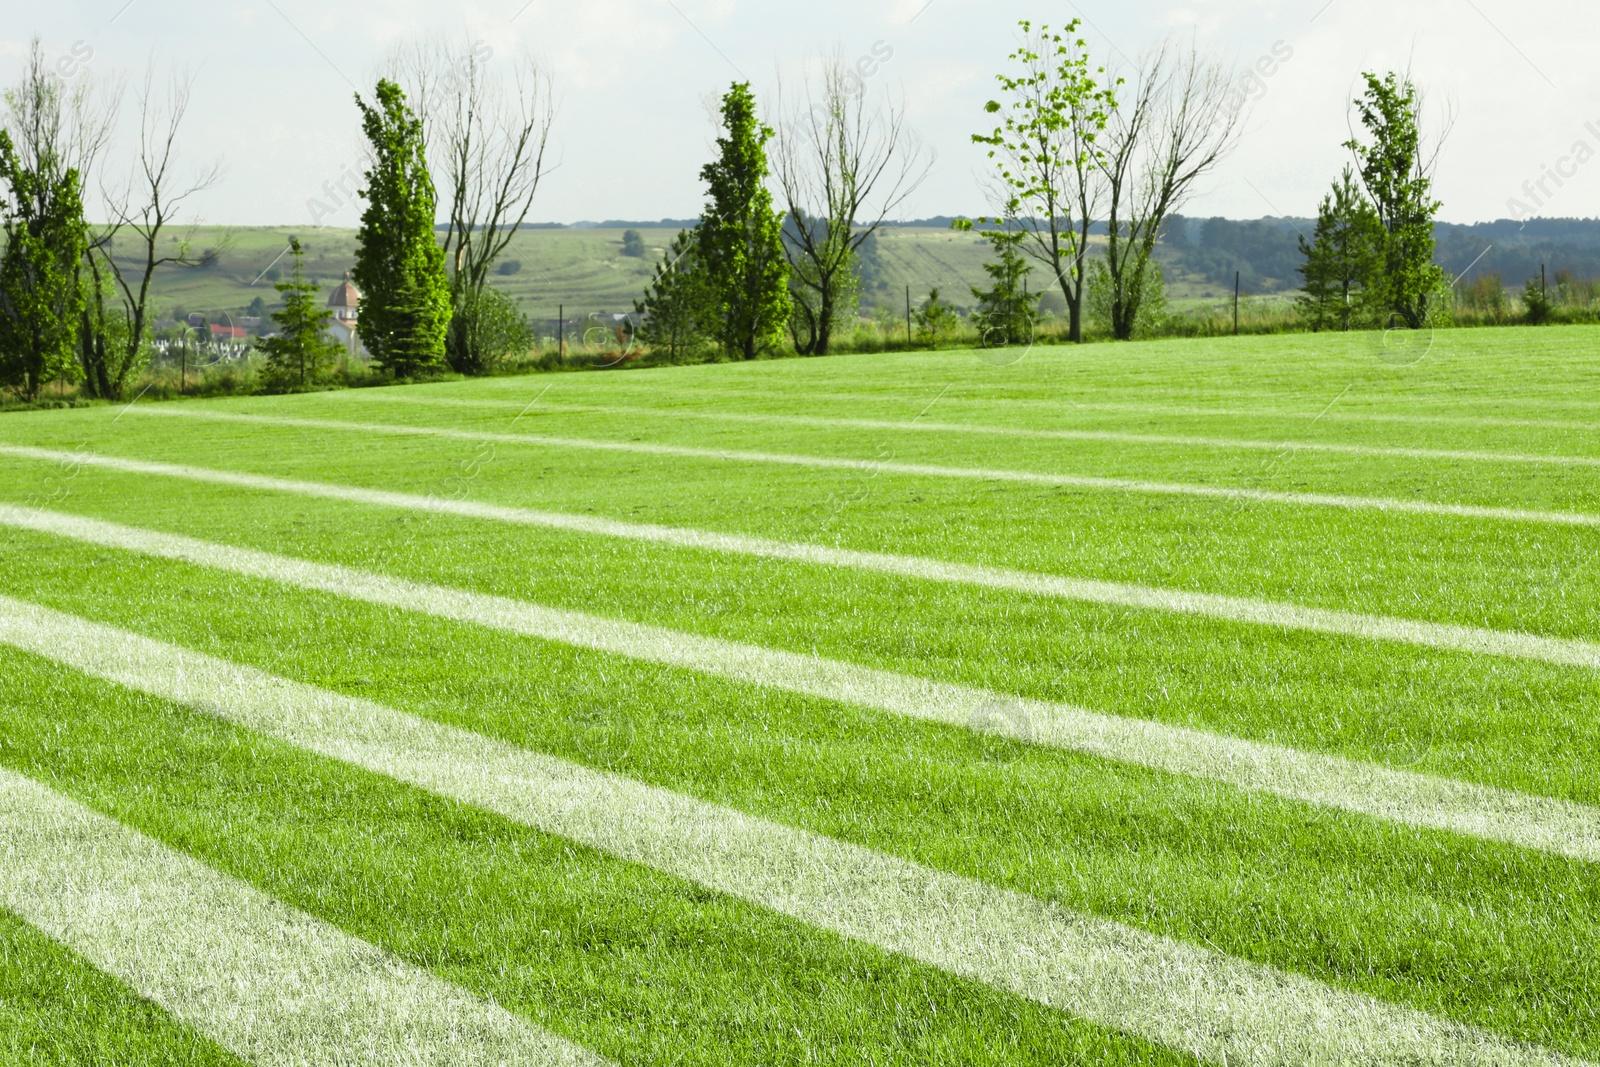 Image of Bright green grass with white markings outdoors